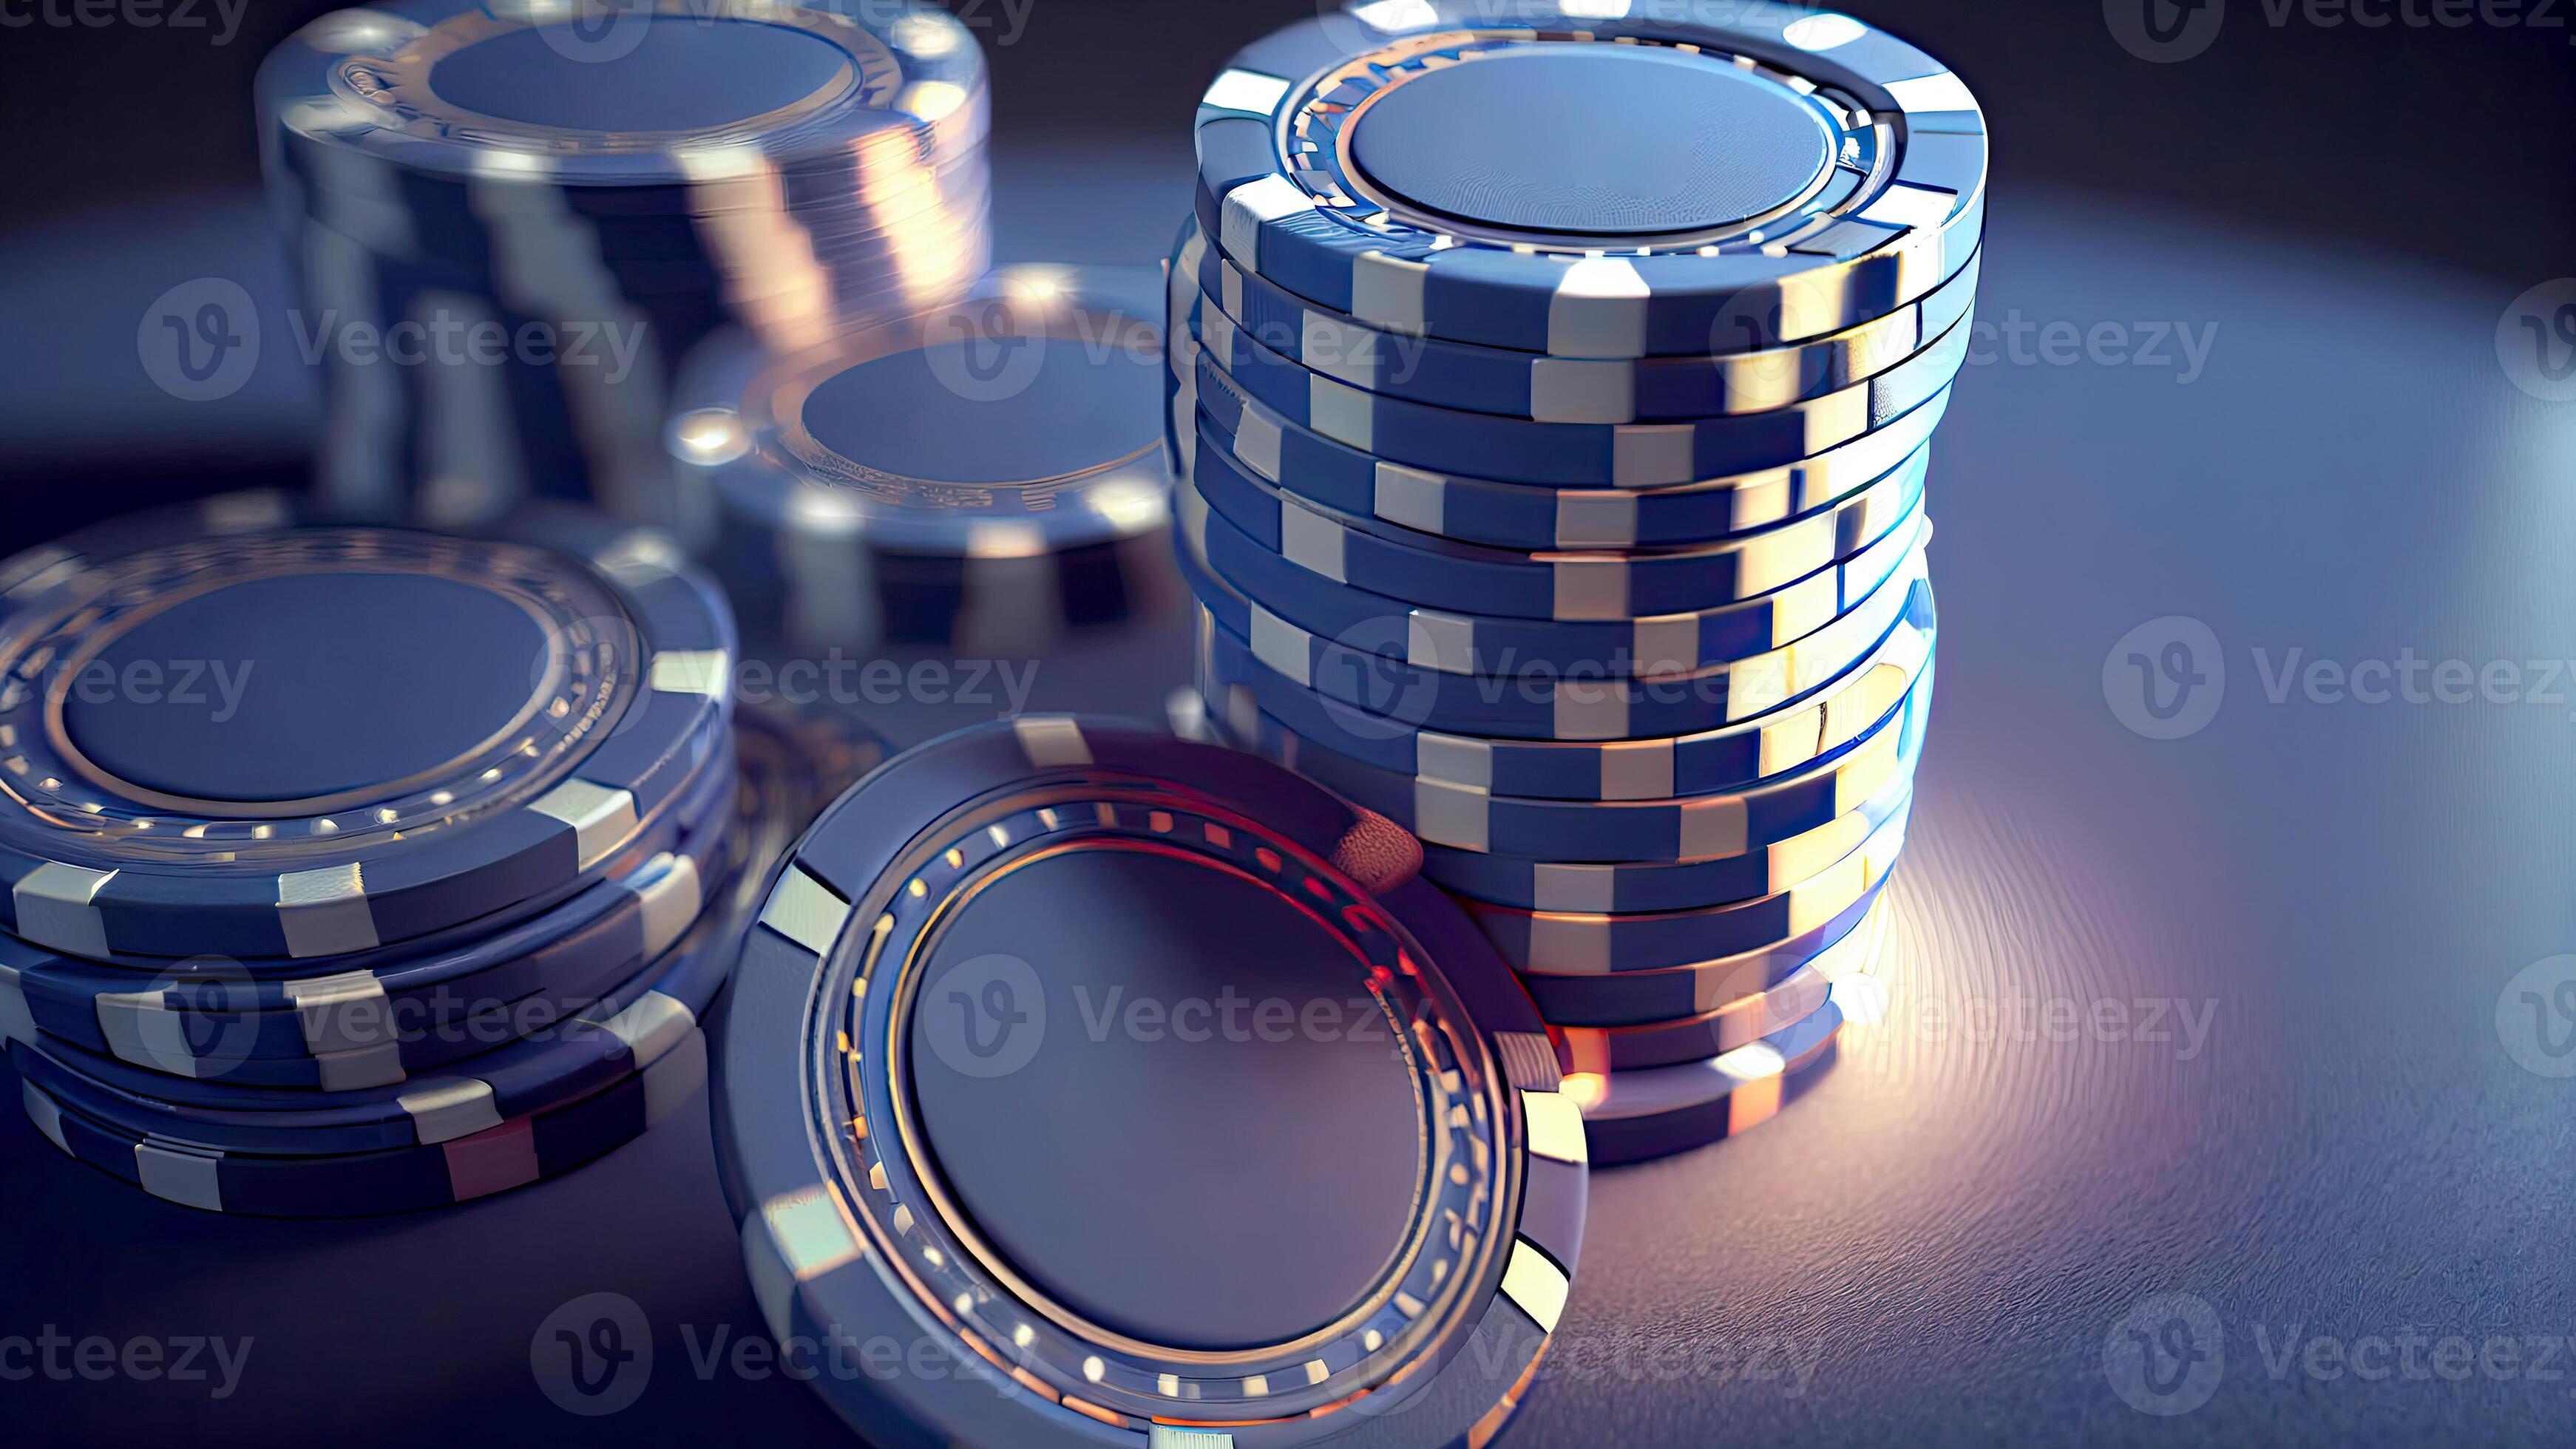 shiny-blue-poker-chips-or-gambling-tokens-for-casino-game-betting-on-a-better-financial-future-generative-ai-technology-photo.jpg